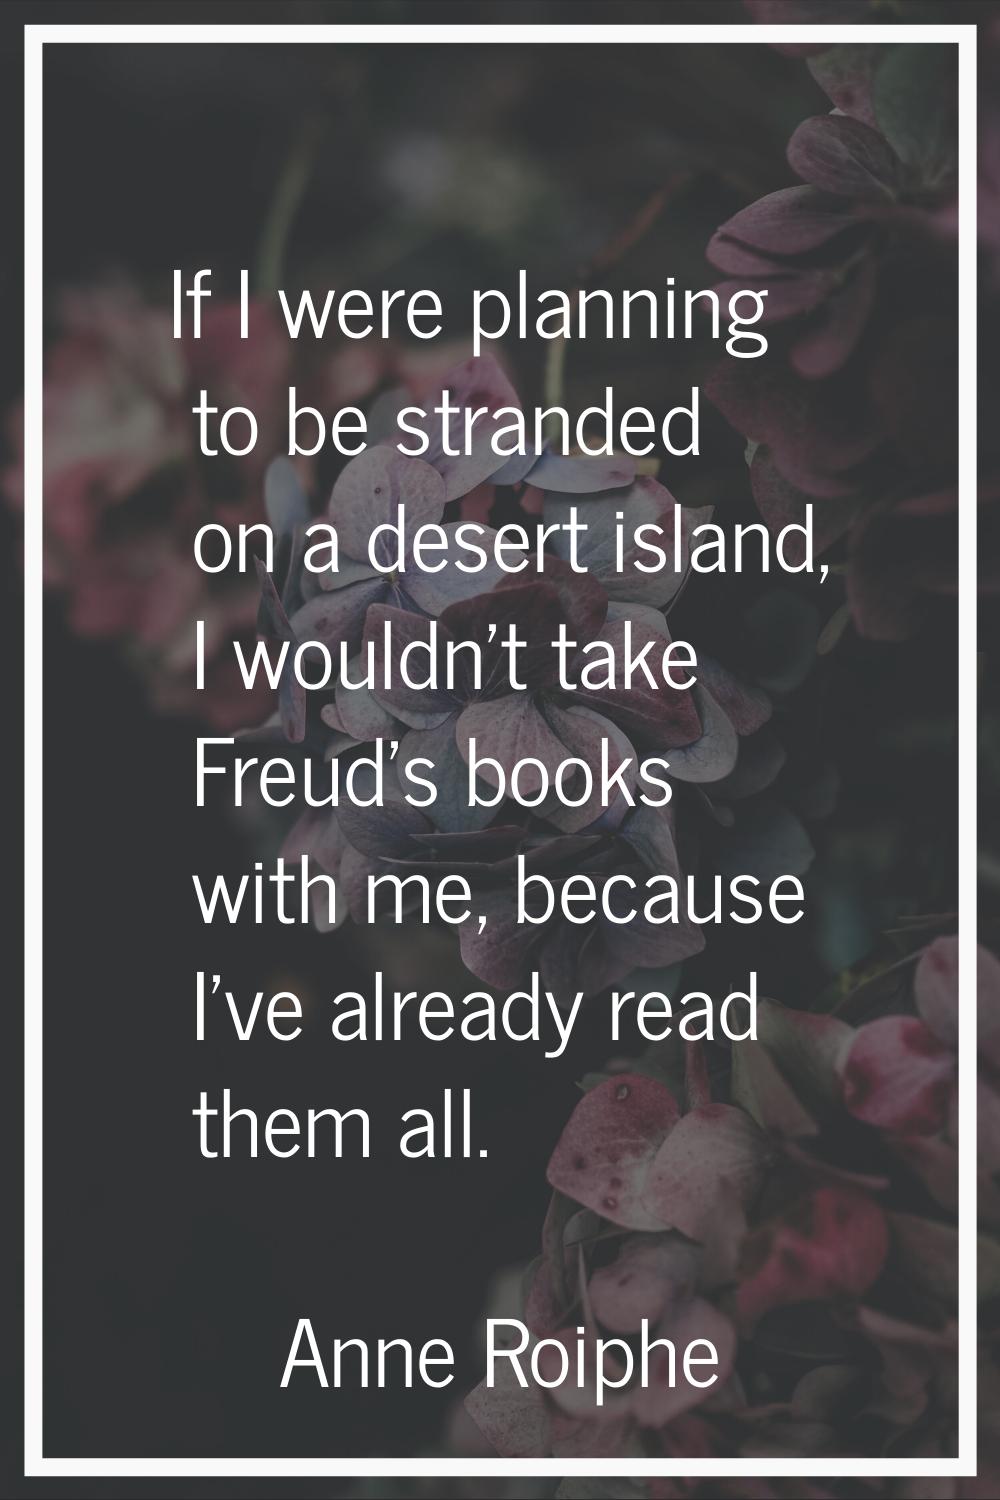 If I were planning to be stranded on a desert island, I wouldn't take Freud's books with me, becaus